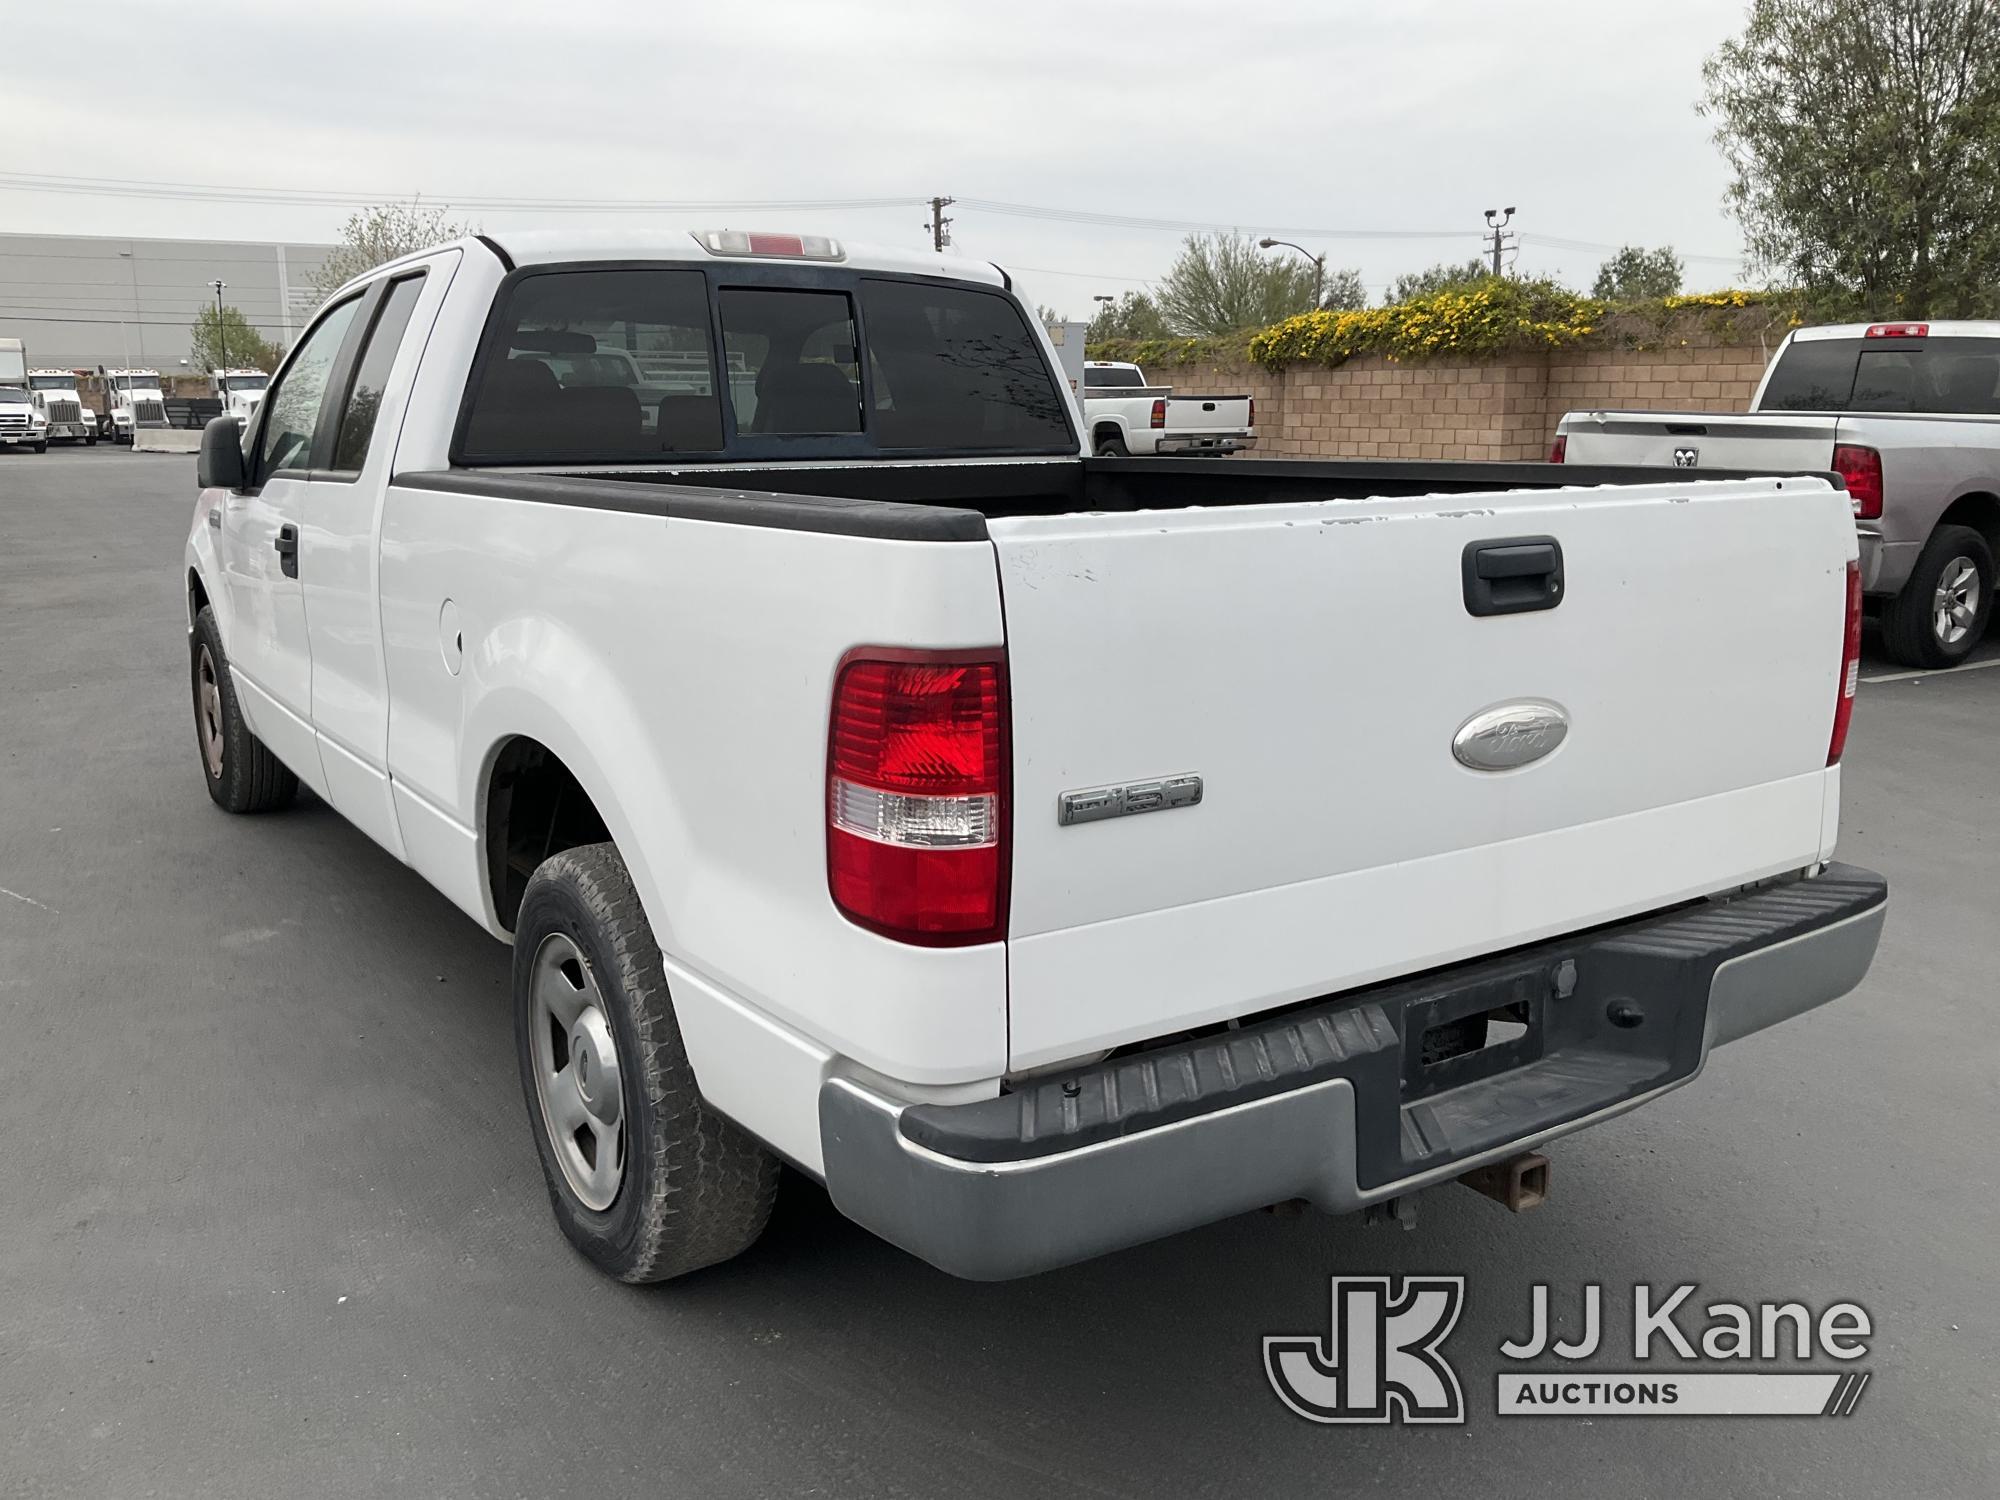 (Jurupa Valley, CA) 2006 Ford F150 Extended-Cab Pickup Truck Runs & Moves, Rear Tires Are Bald